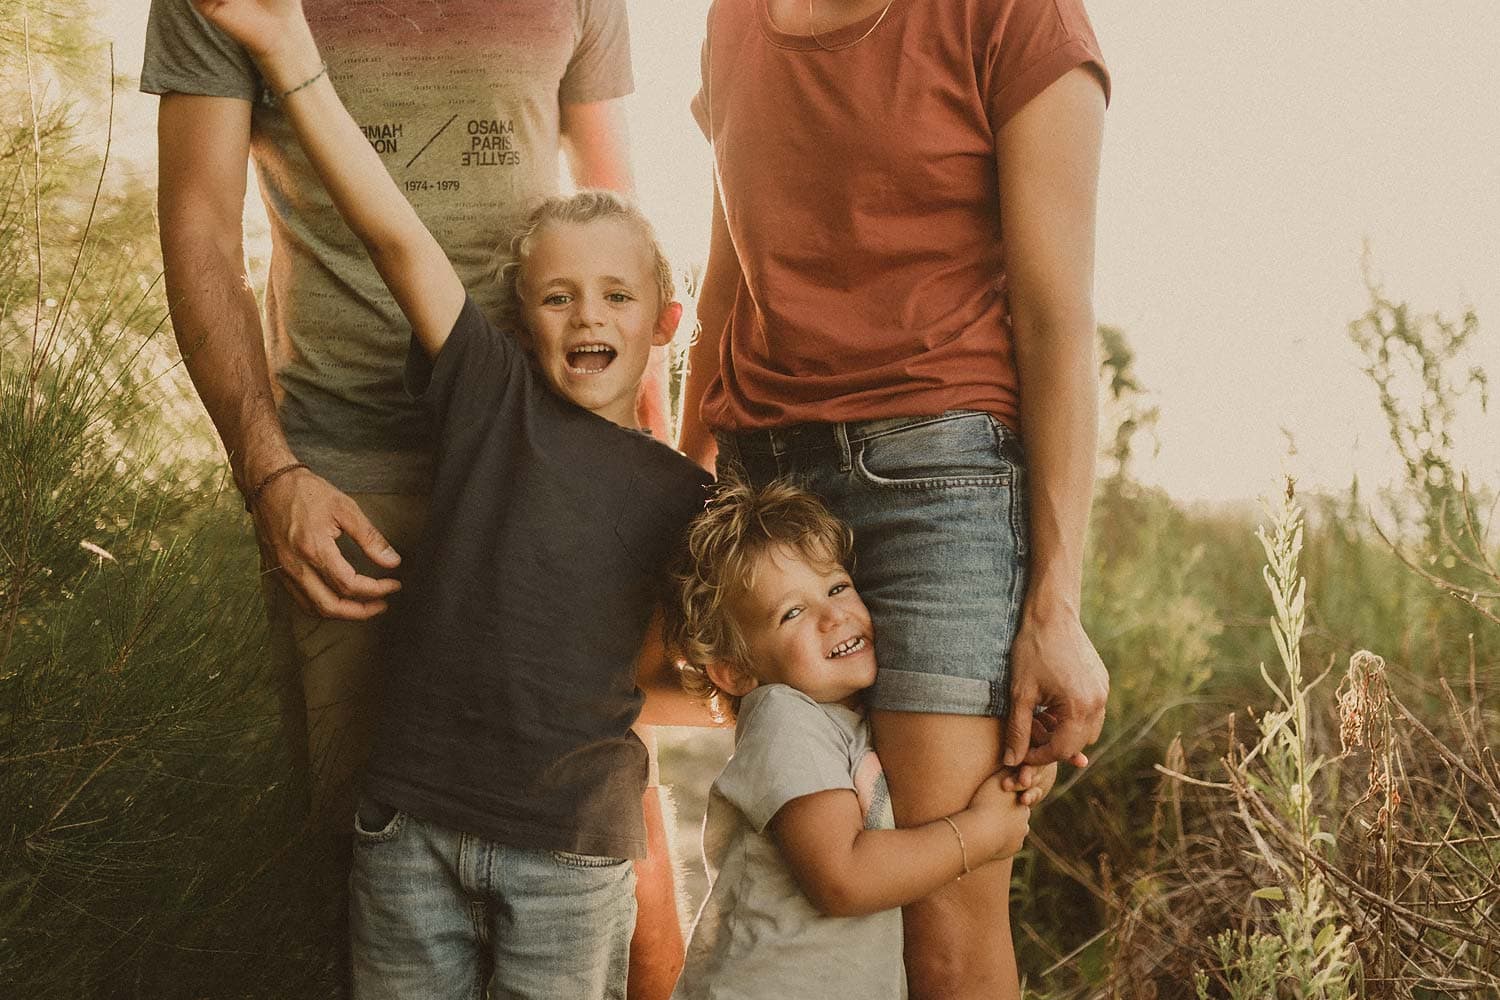 Sutherland-shire-family-photography-family-in-bushland-with-two-young-boys-smiling-at-camera-whilst-mum-and-dad-hold-them-in-background